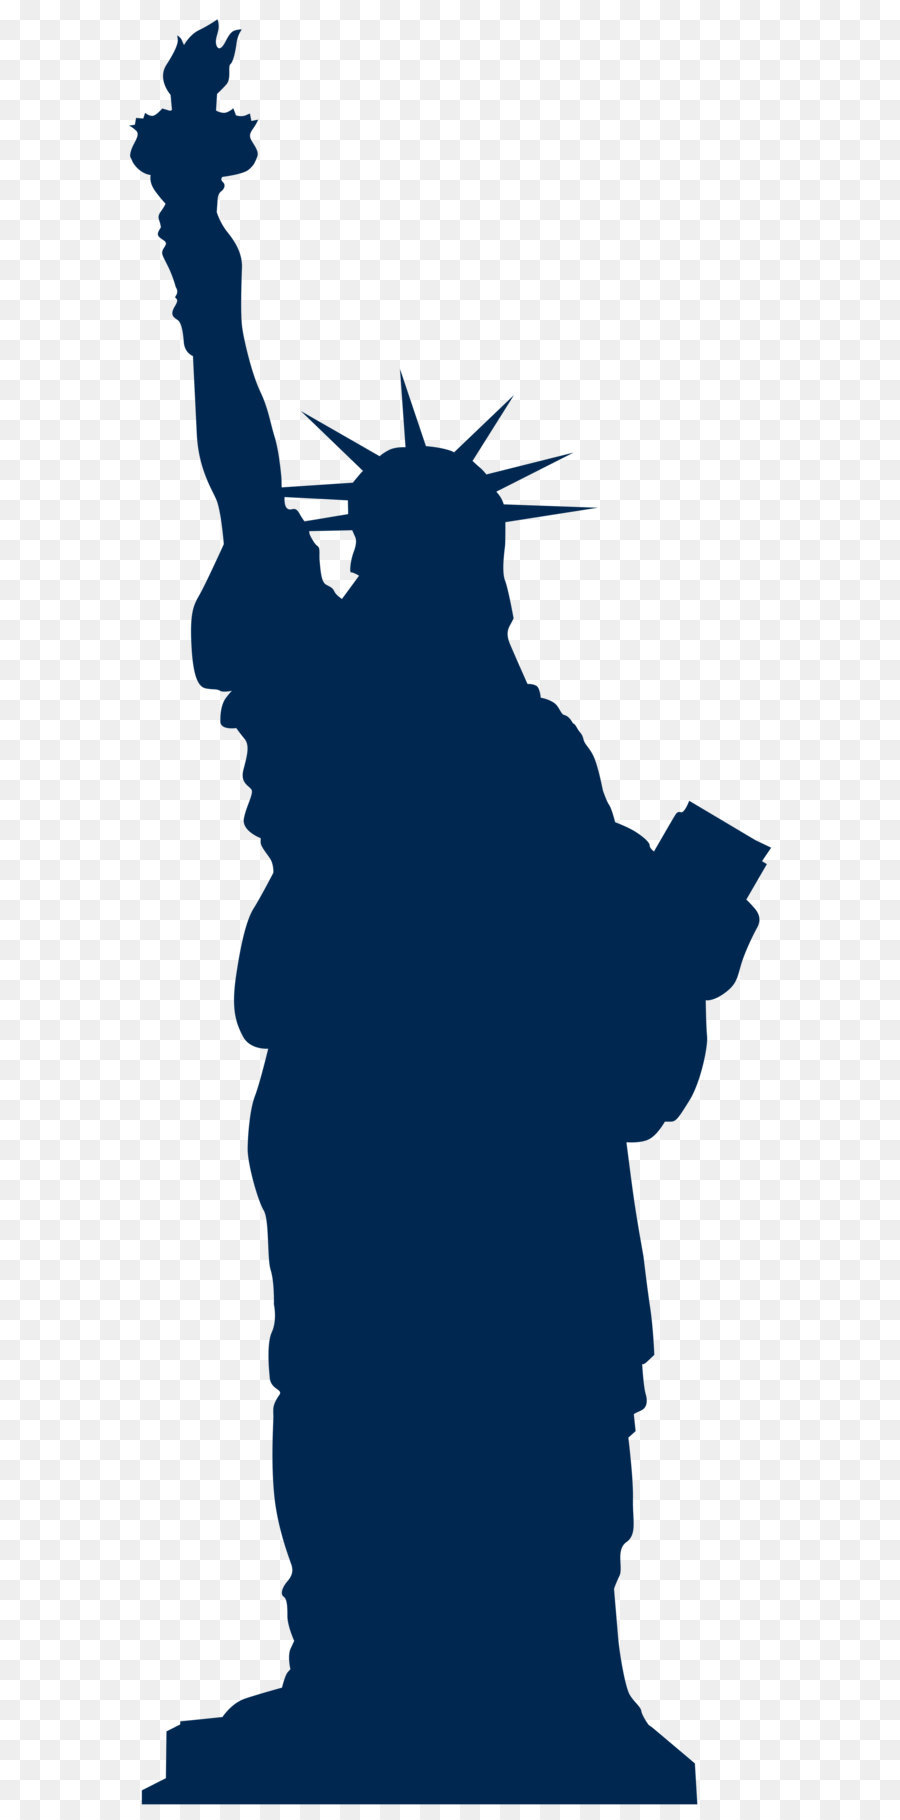 Statue of Liberty National Monument Statue of Freedom - Statue of Liberty Silhouette PNG Clip Art Image png download - 2879*8000 - Free Transparent 4th Of July png Download.